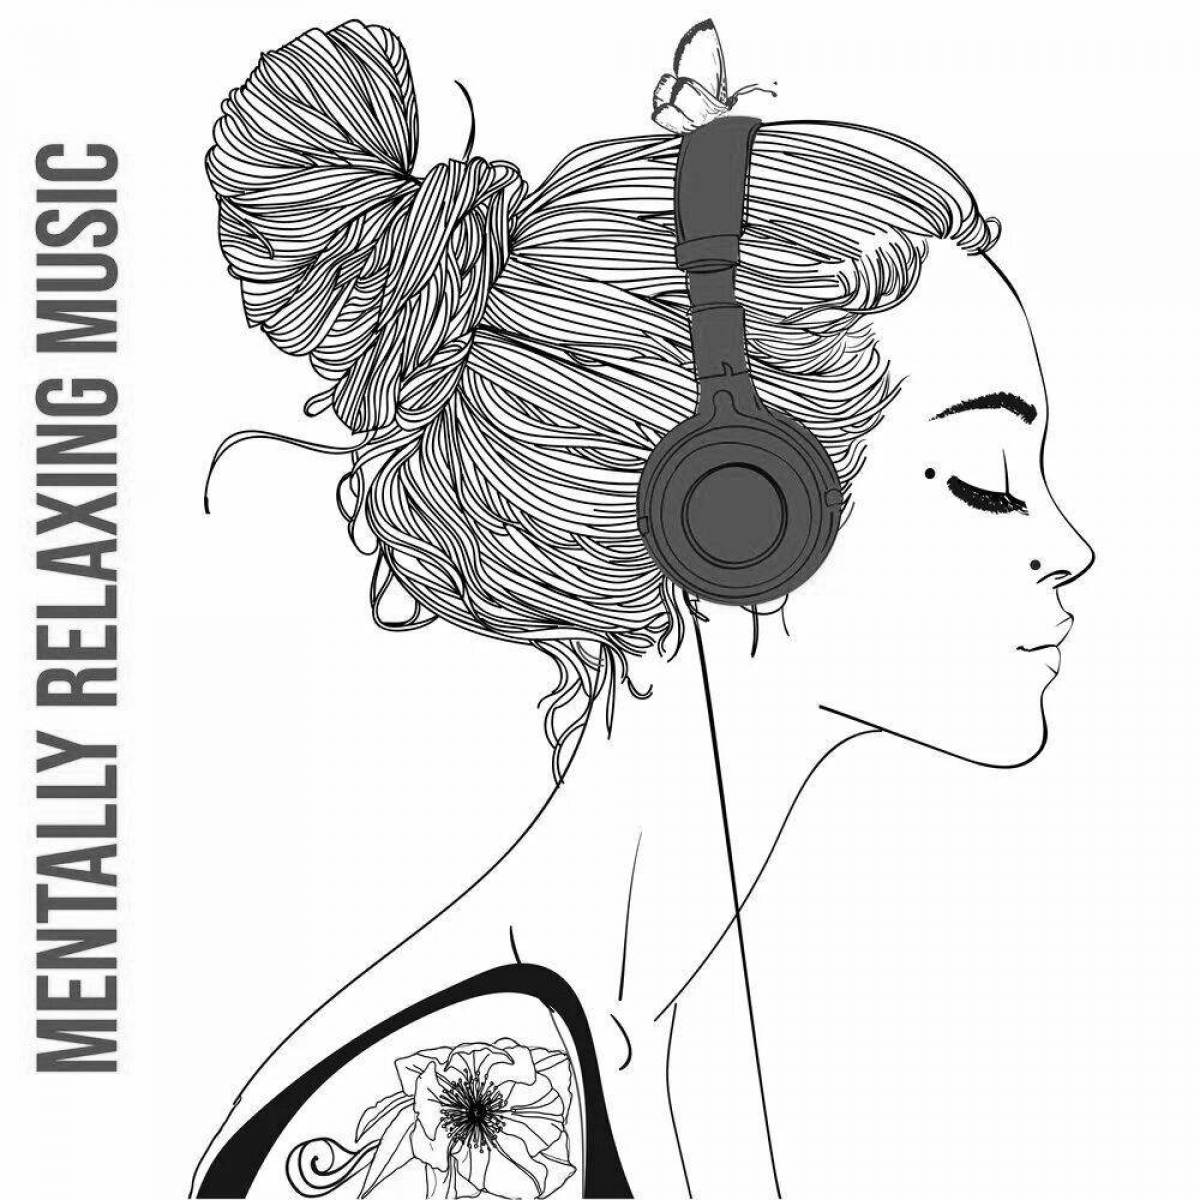 Charming coloring girl with headphones